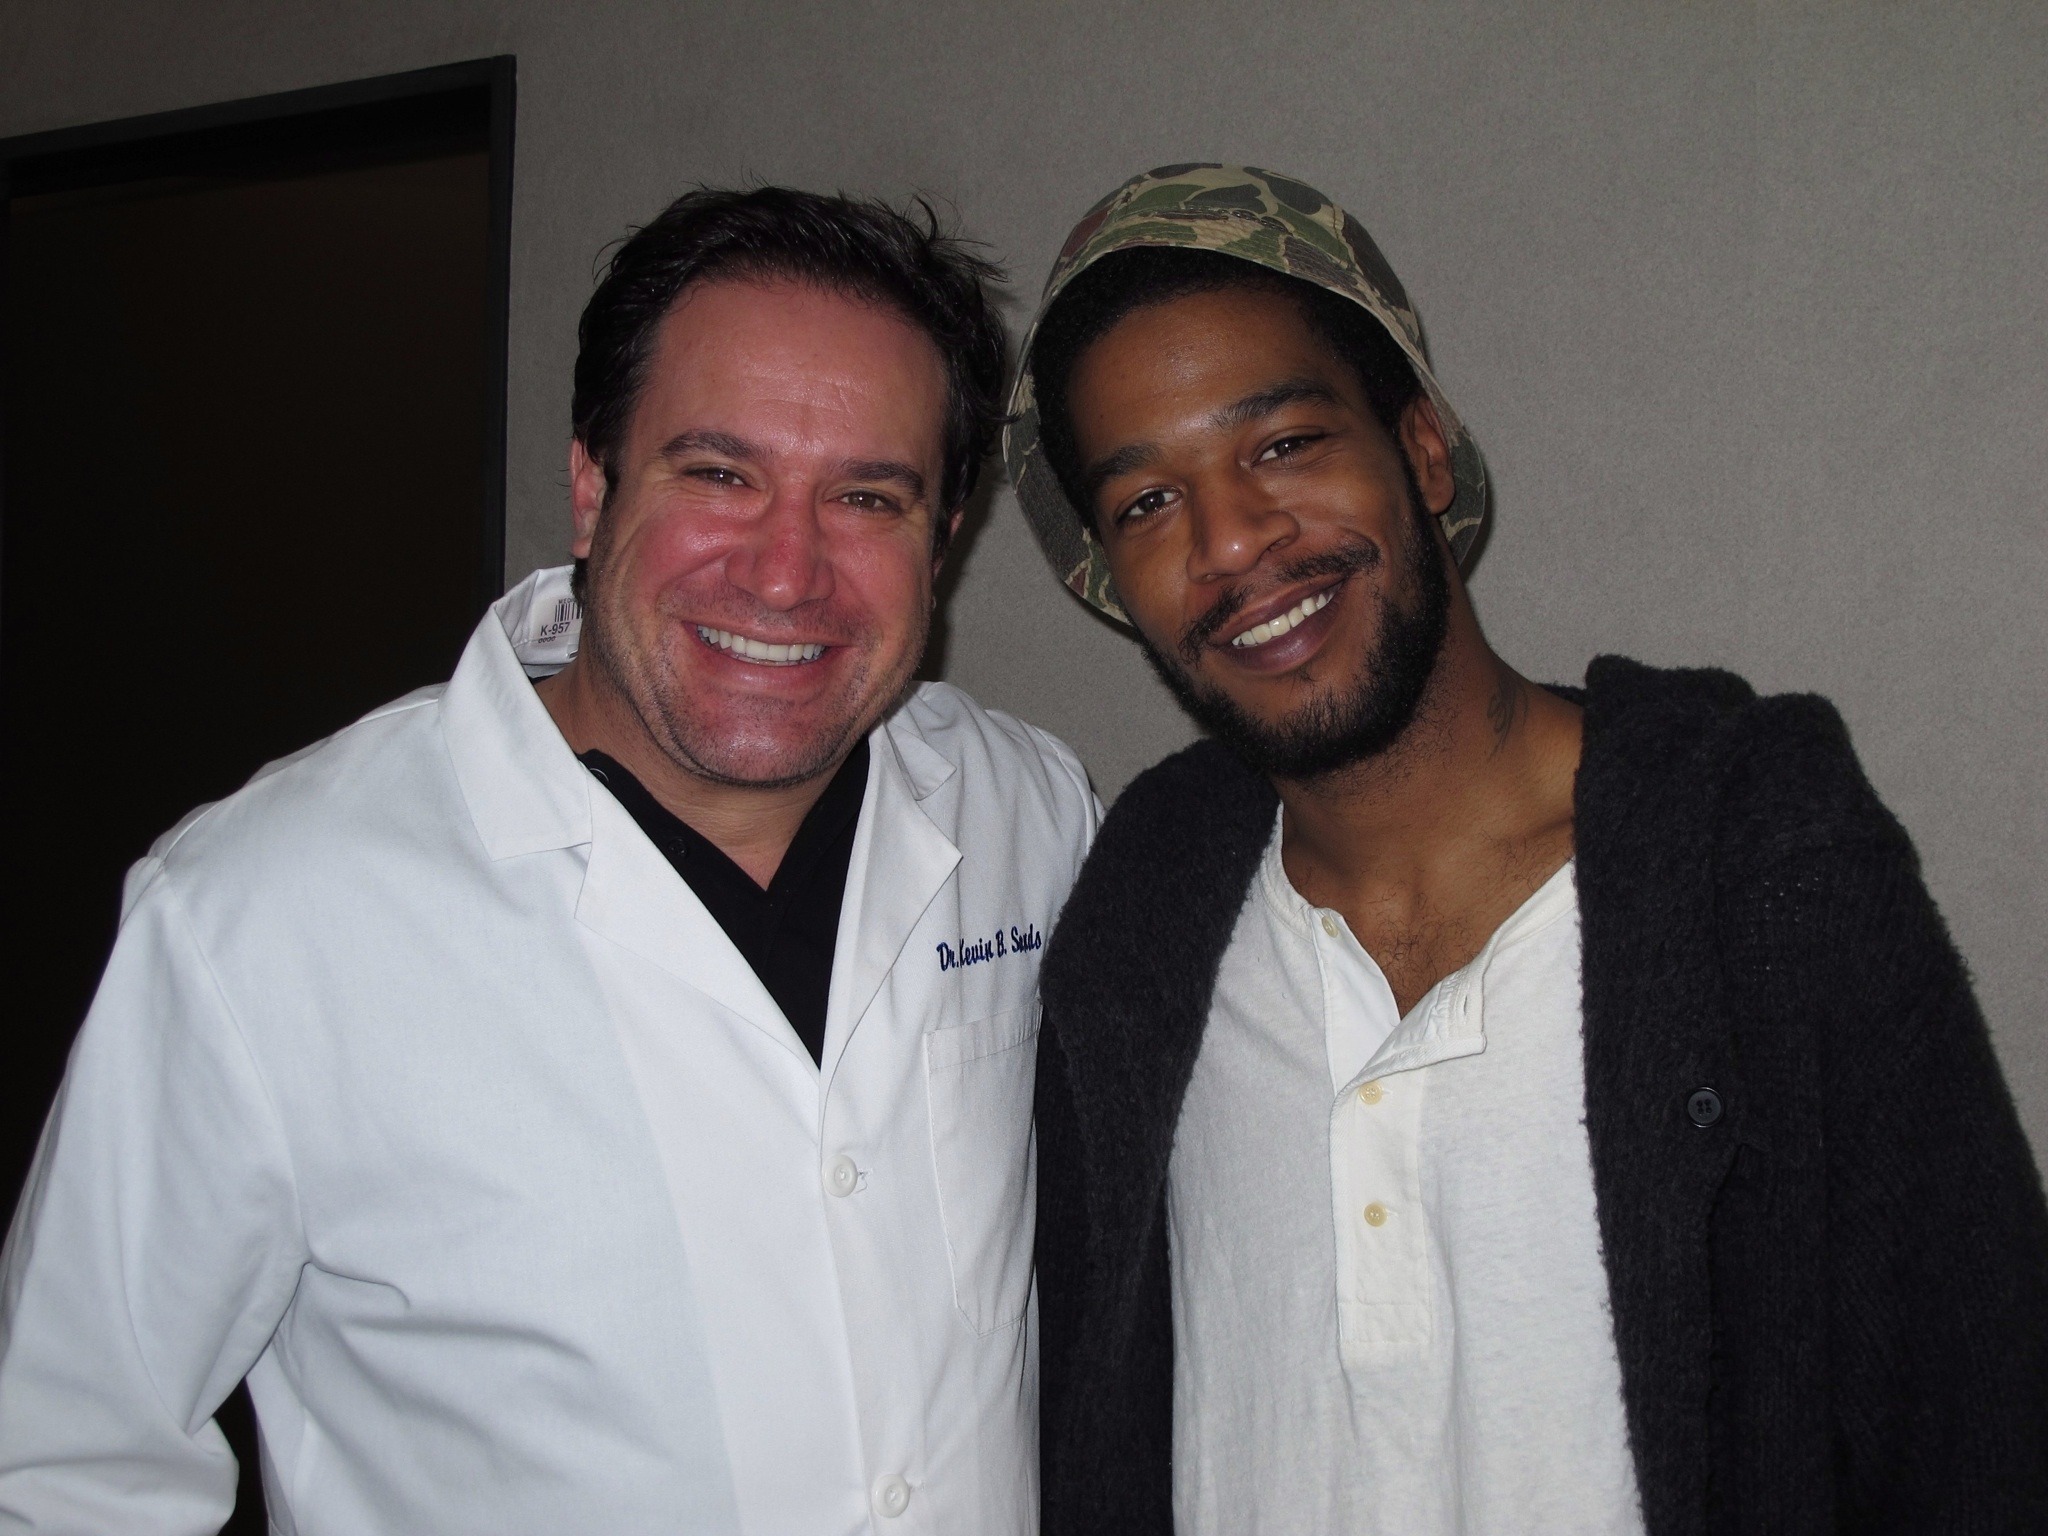 Dr. Kevin Sands with Kid Cudi